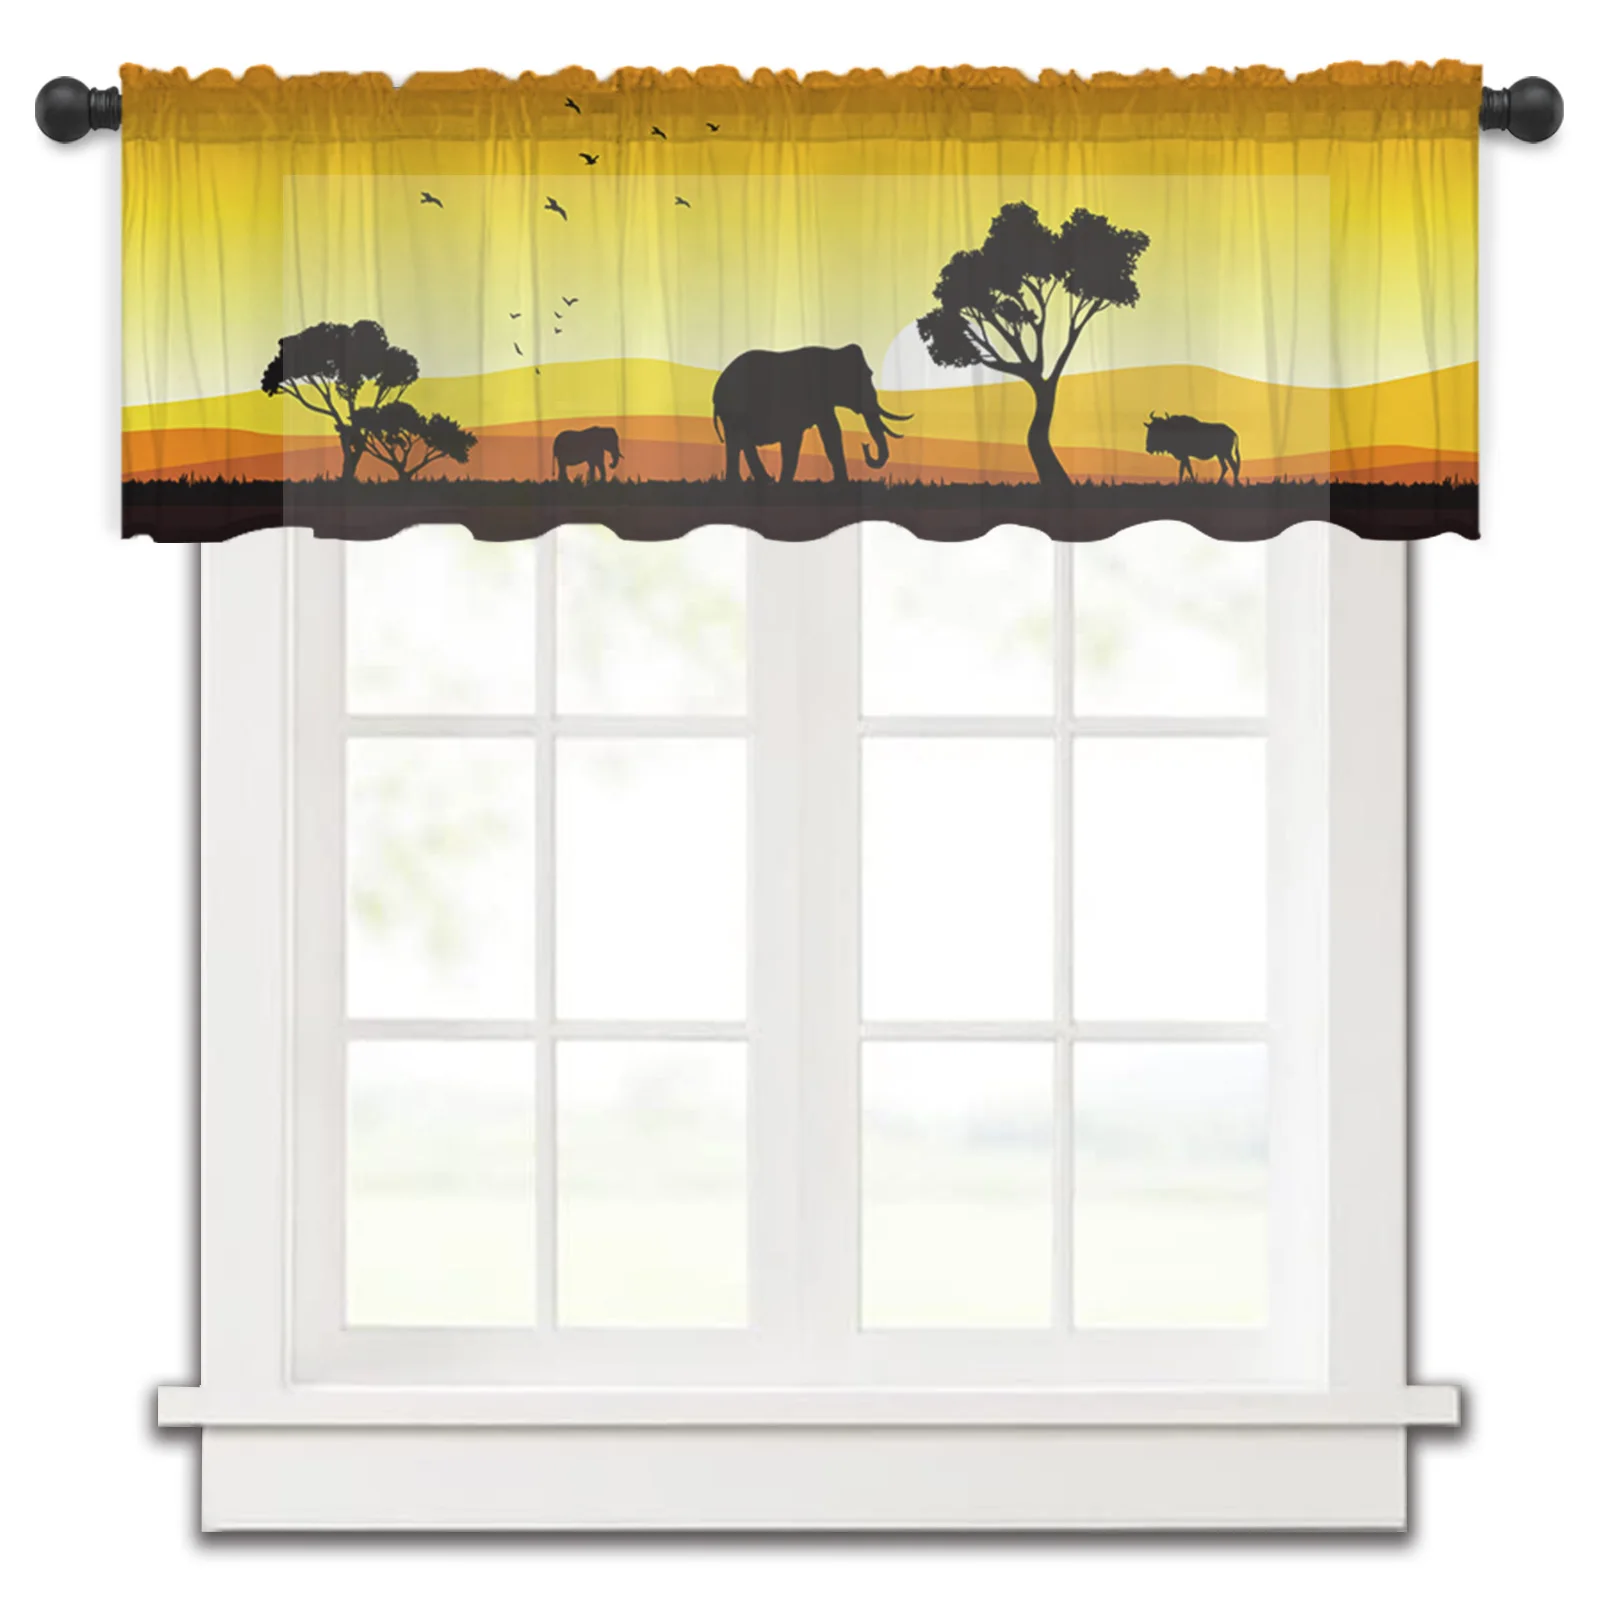 

Africa Elephant Sunset Kitchen Small Window Curtain Tulle Sheer Short Curtain Bedroom Living Room Home Decor Voile Drapes